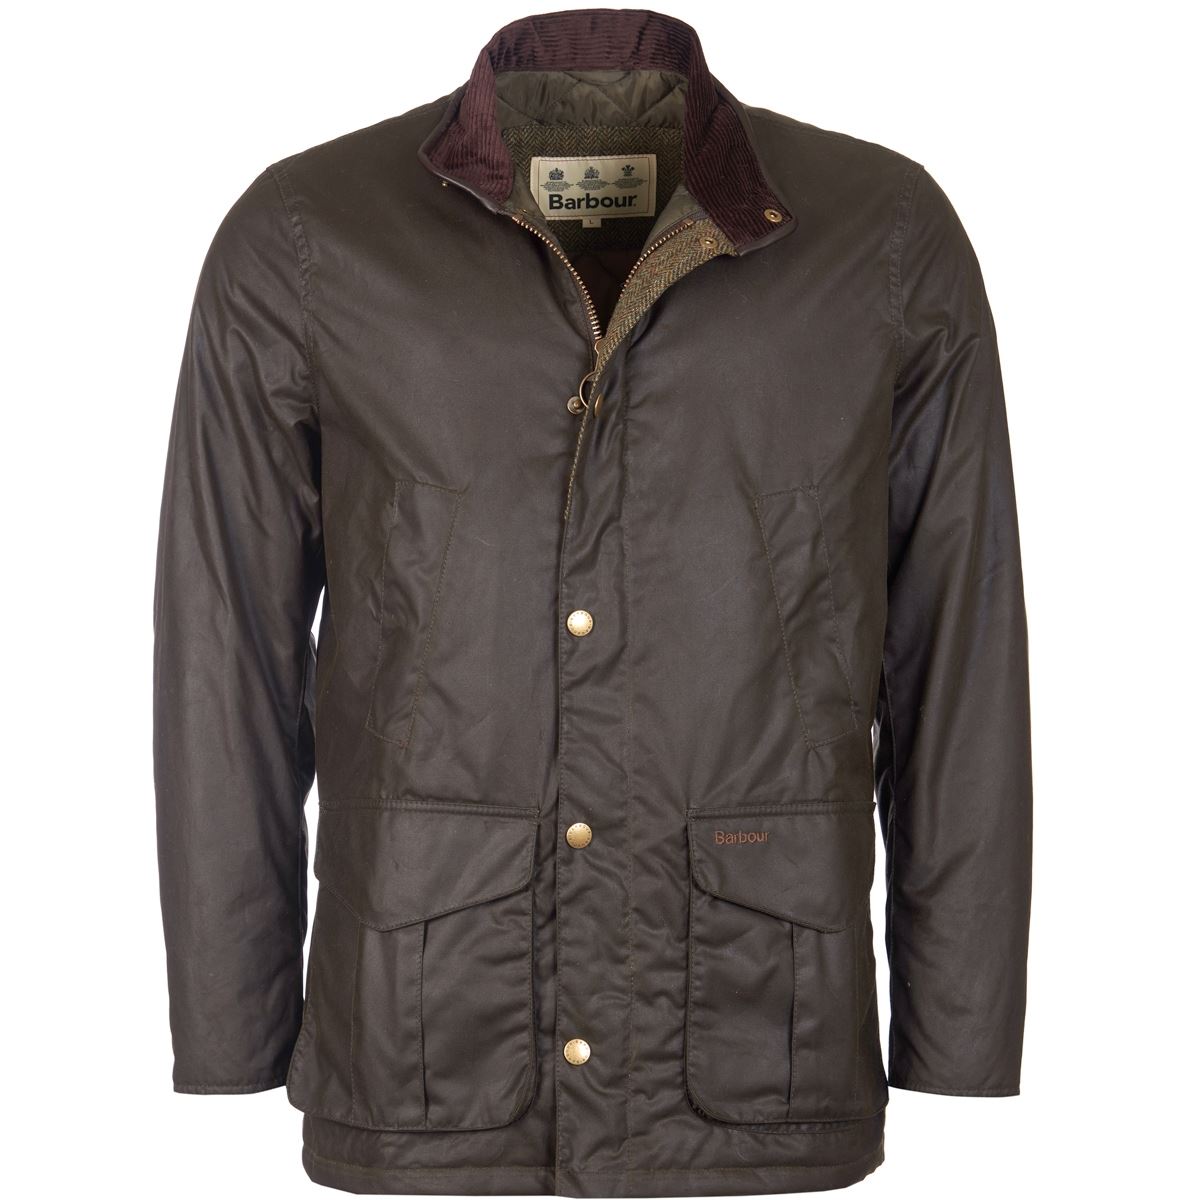 What is the outer layer material of the Barbour Hereford Wax Jacket?